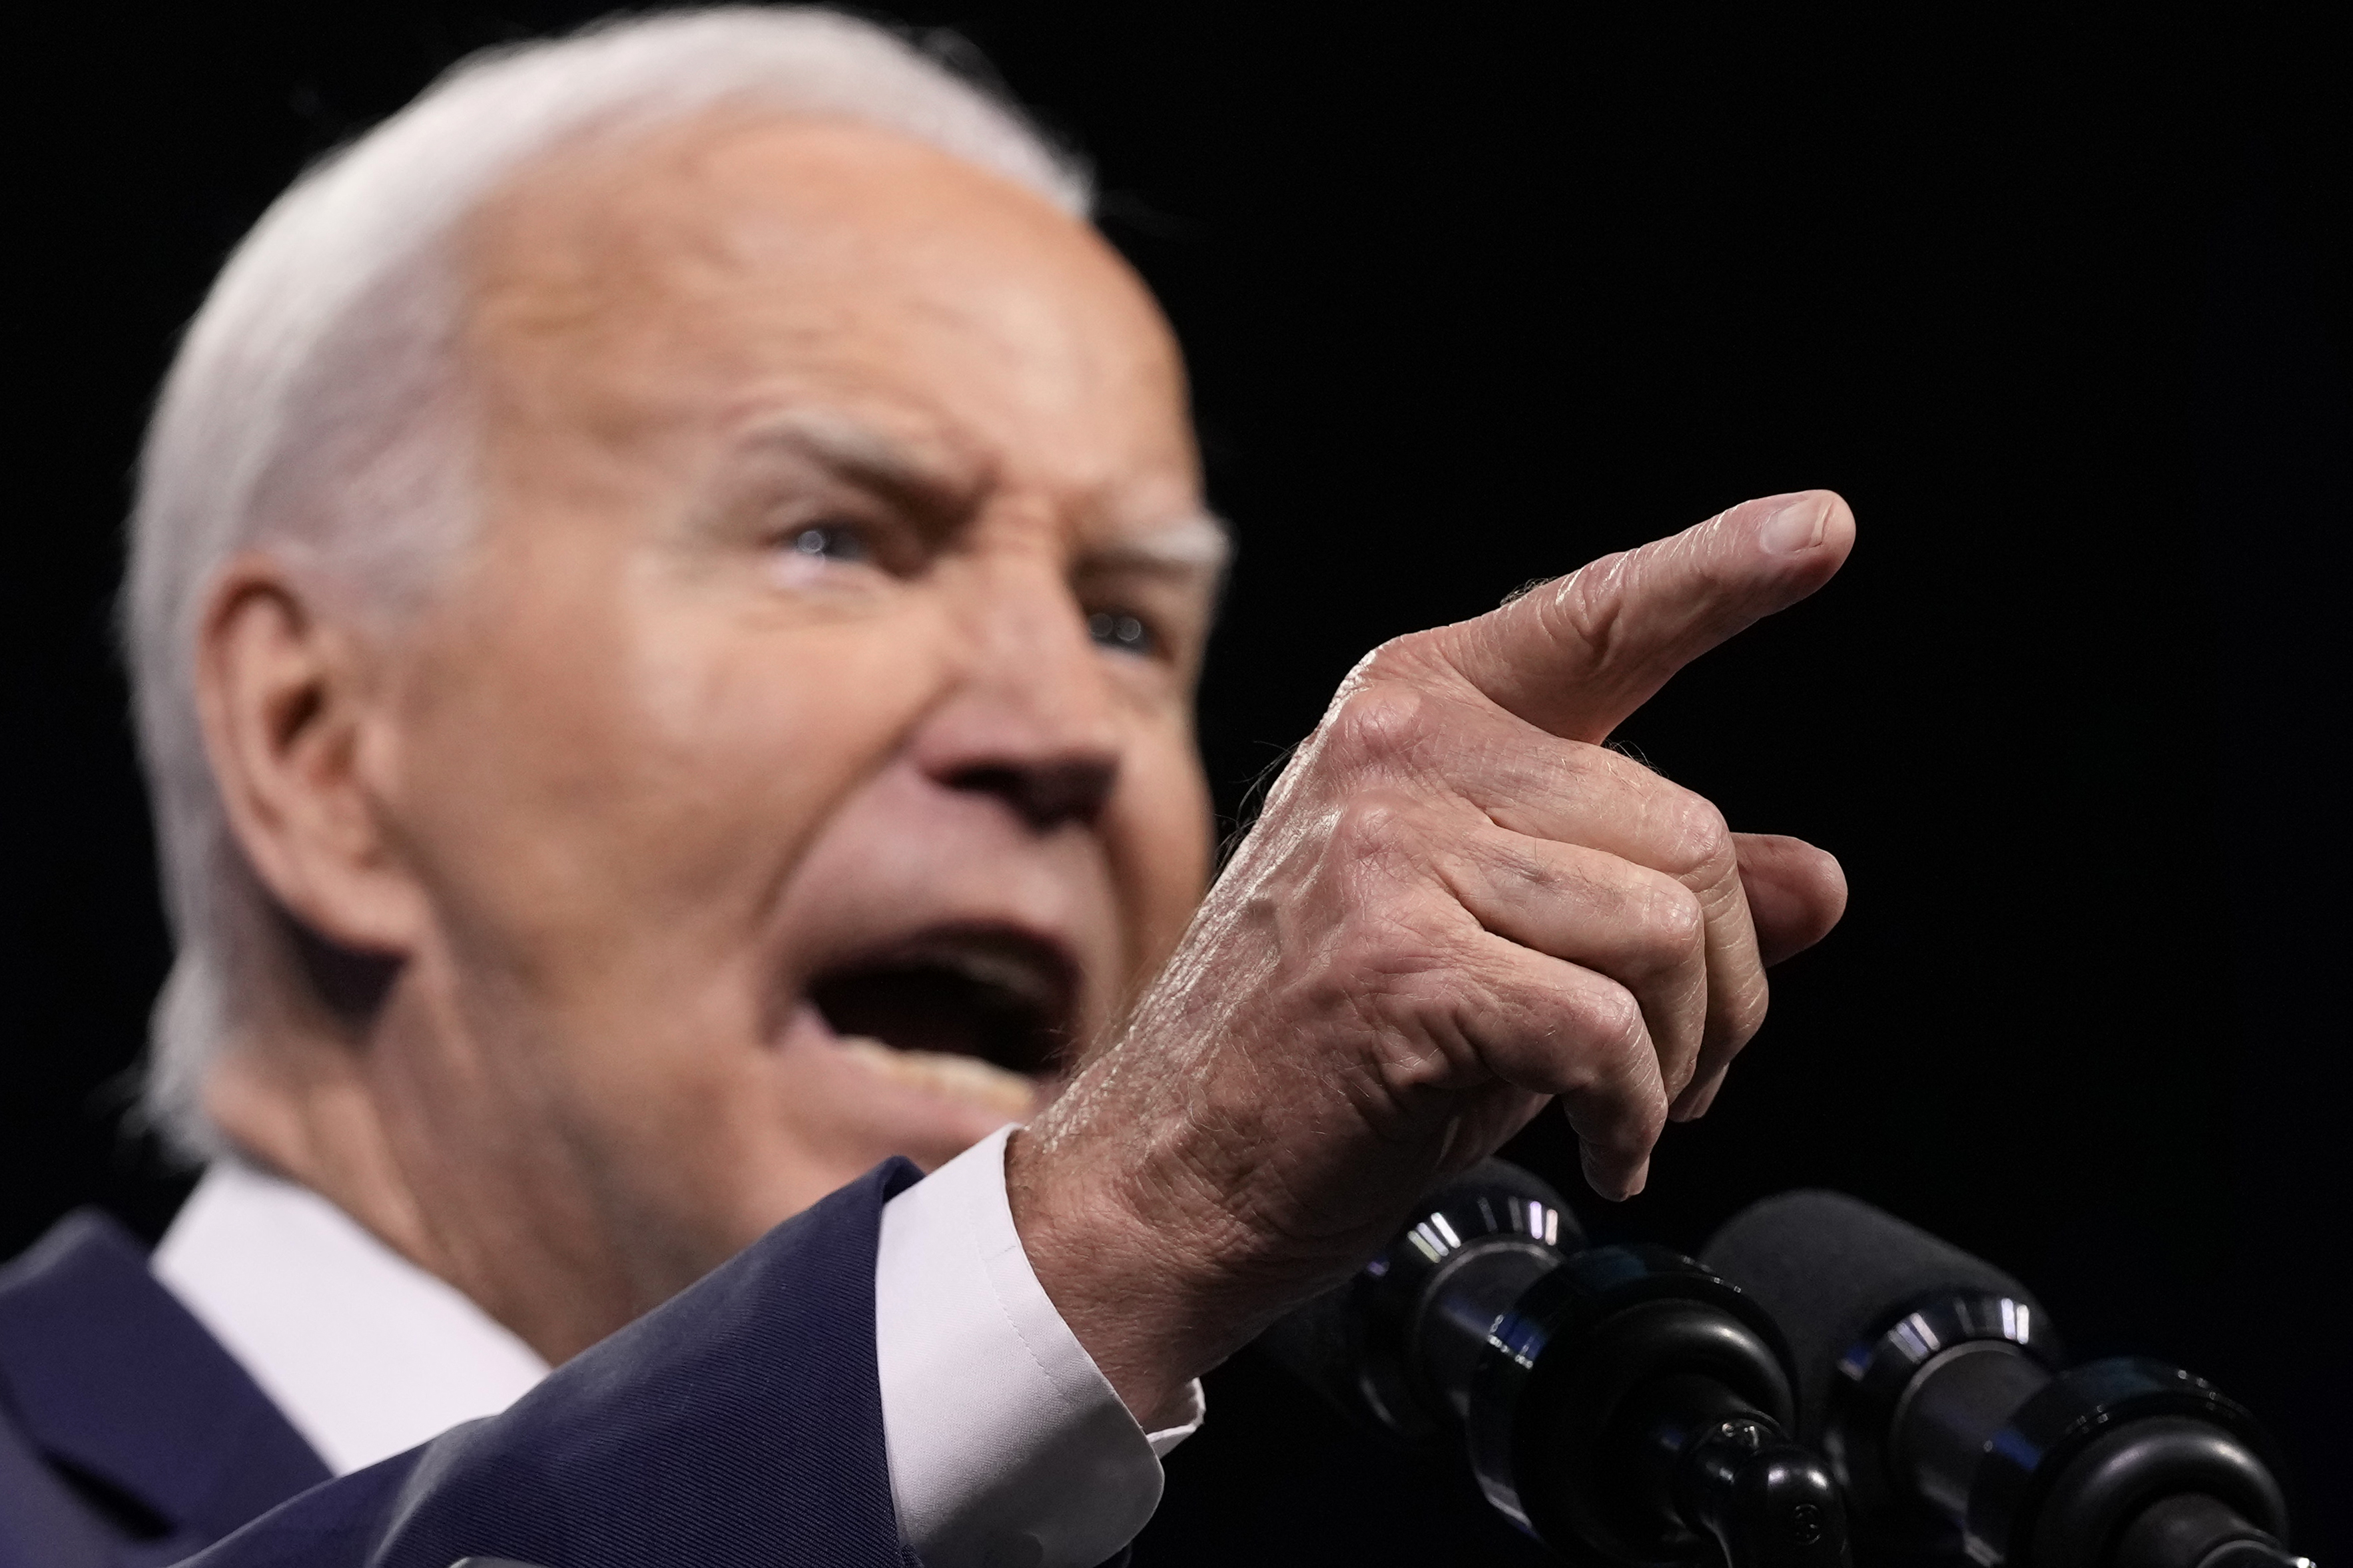 President Joe Biden speaks at the 115th NAACP National Convention in Las Vegas, Tuesday, July 16, 2024. Biden is aiming to showcase his administration's support for Black voters. (AP Photo/Susan Walsh)